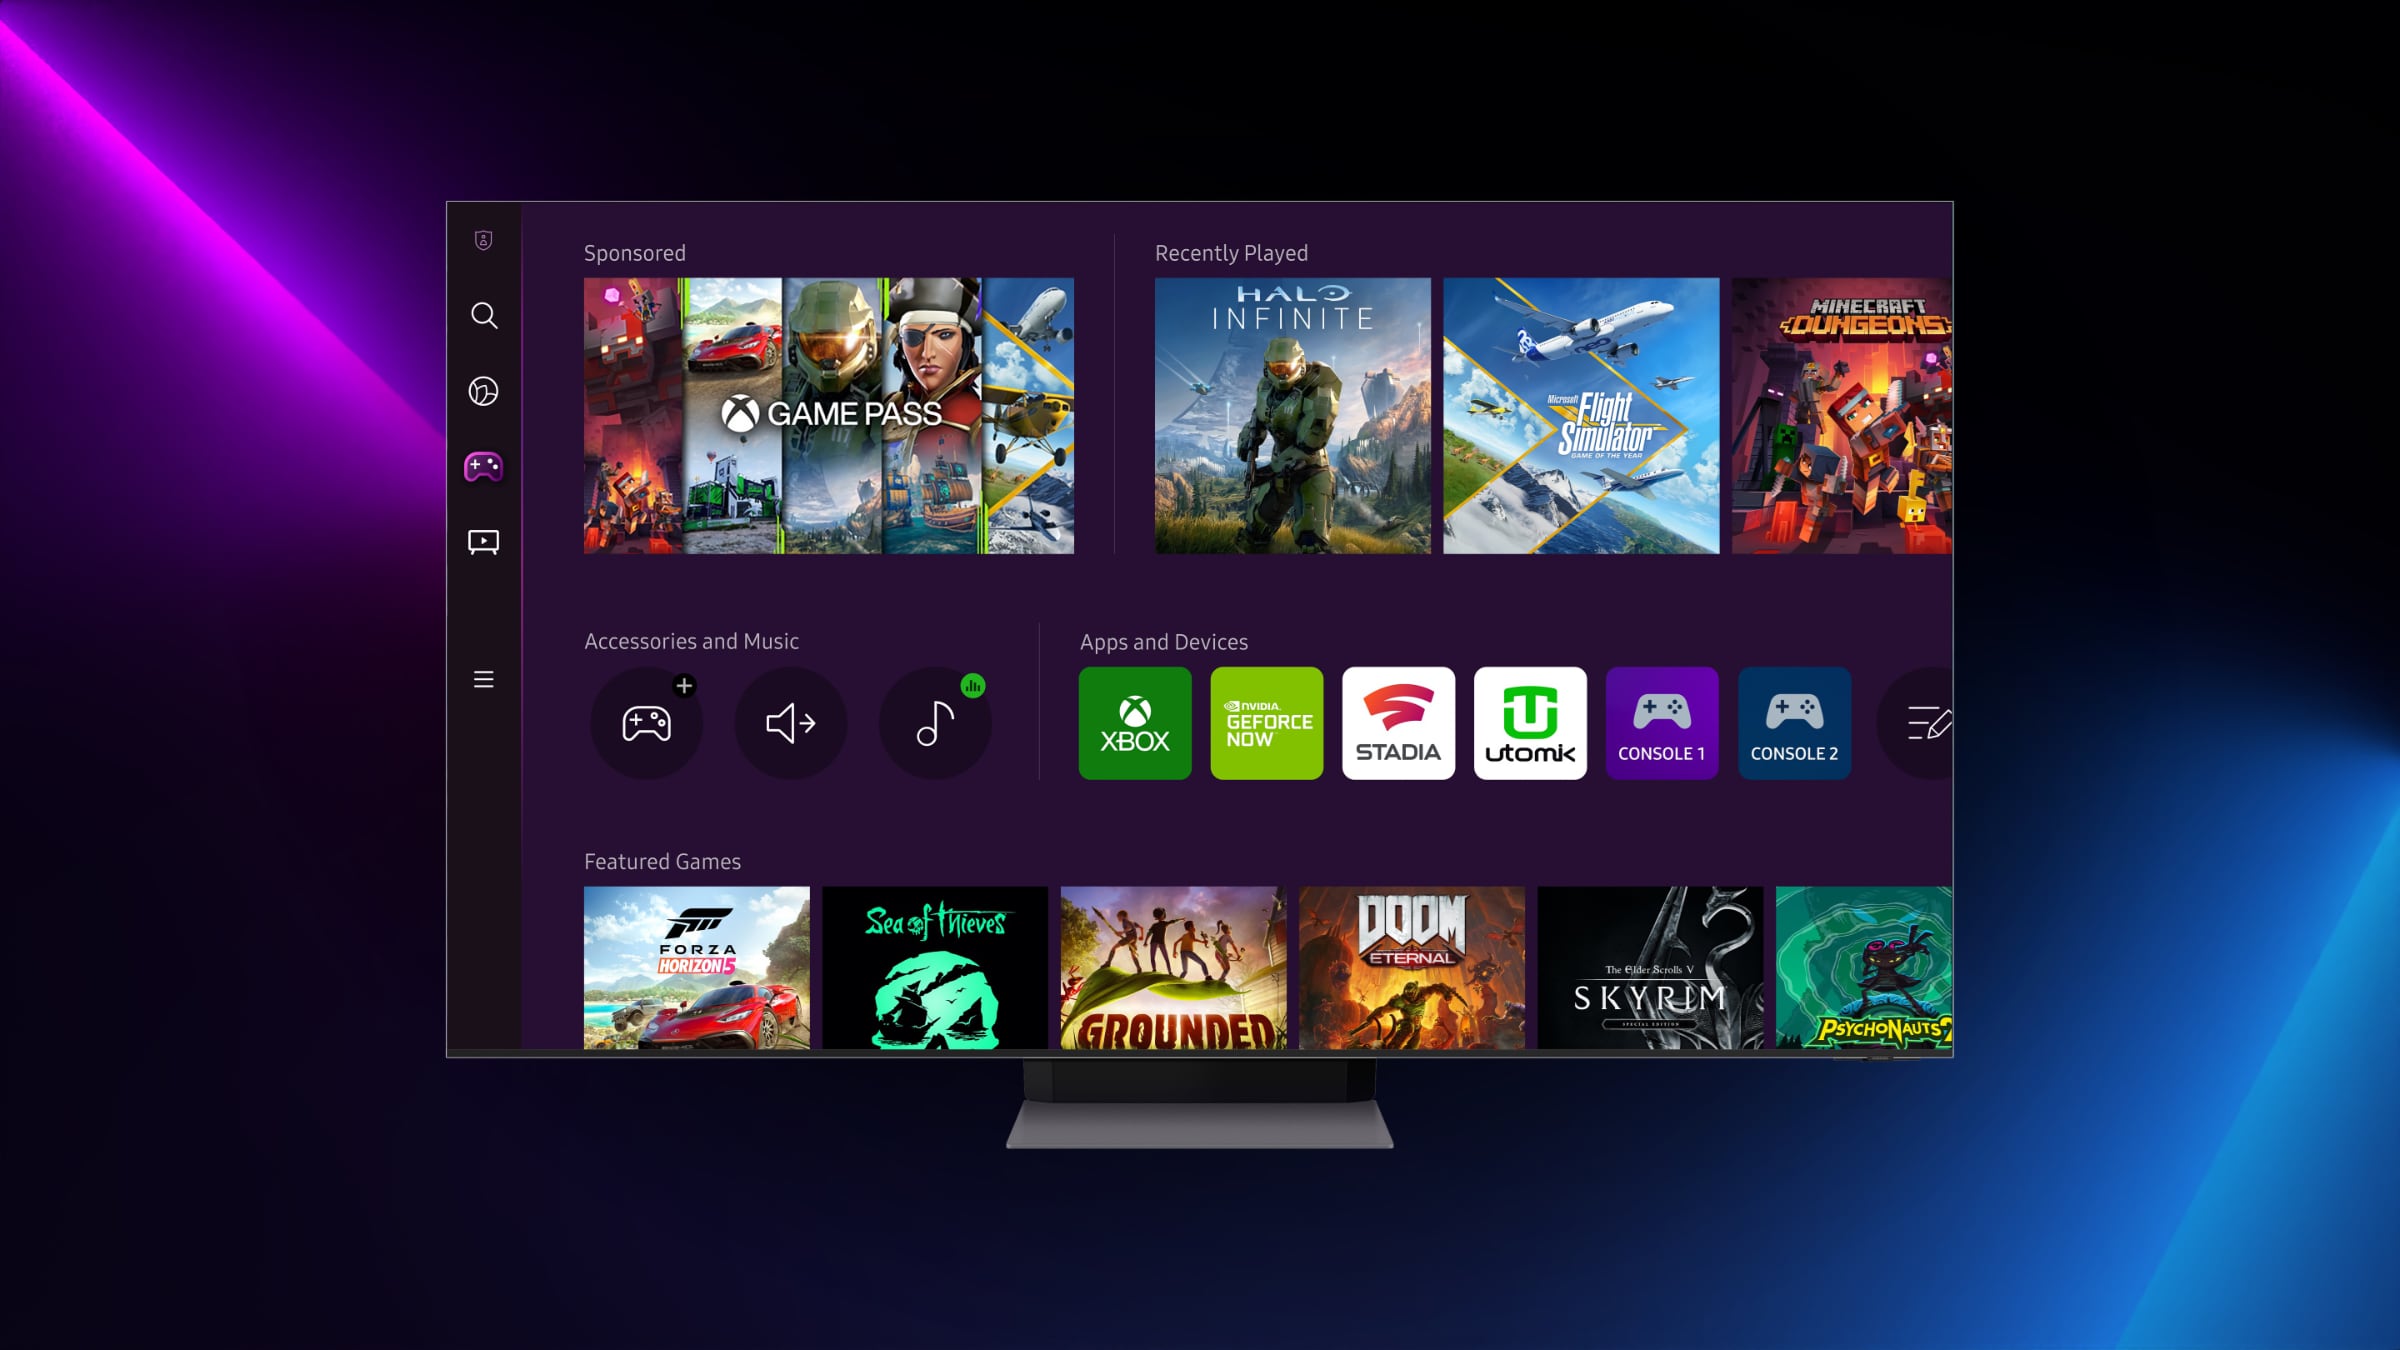 Xbox app to launch on Samsung Smart TVs in June, but only 2022 models -  FlatpanelsHD